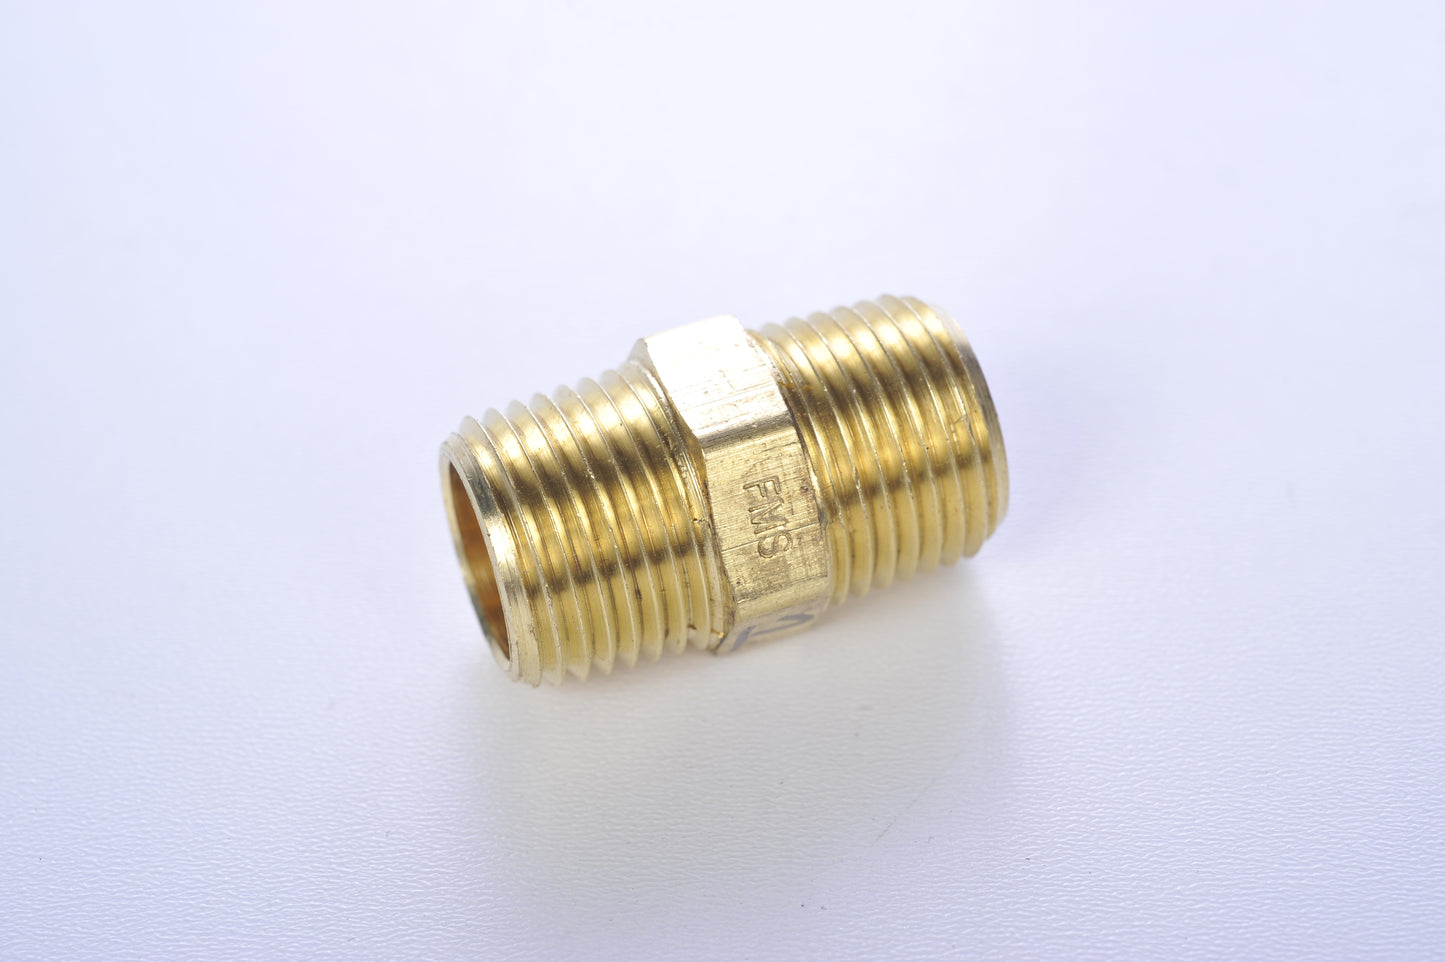 Brass Fitting - HMPHMP 1/2" Male to 1/2" Male Pipe Thread | Barbecues Galore Get it online or in store in Burlington, Oakville, Etobicoke, and Calgary